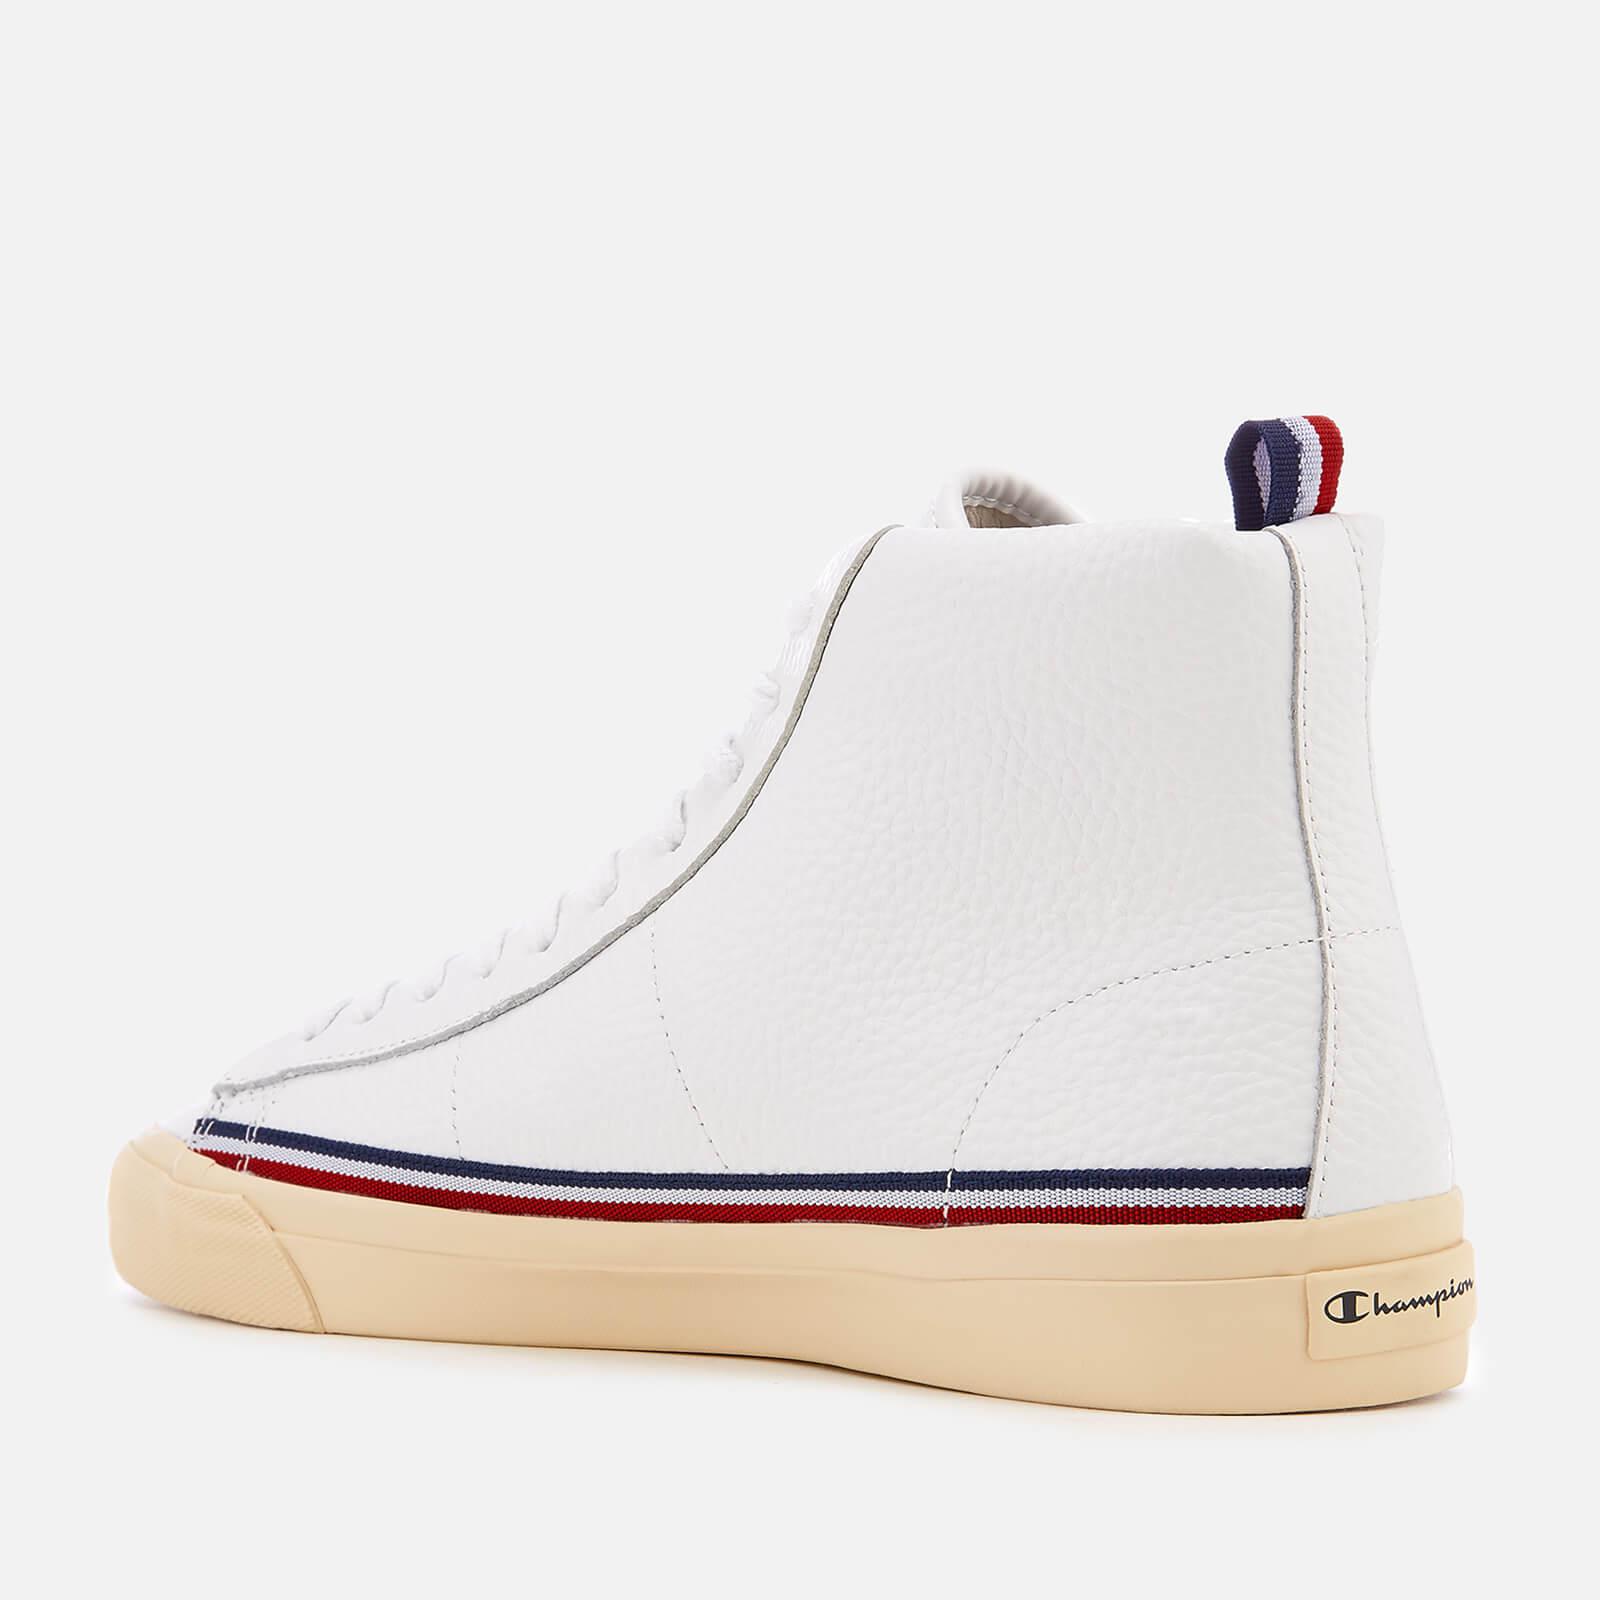 Champion Mercury Mid Leather Trainers in White for Men - Lyst